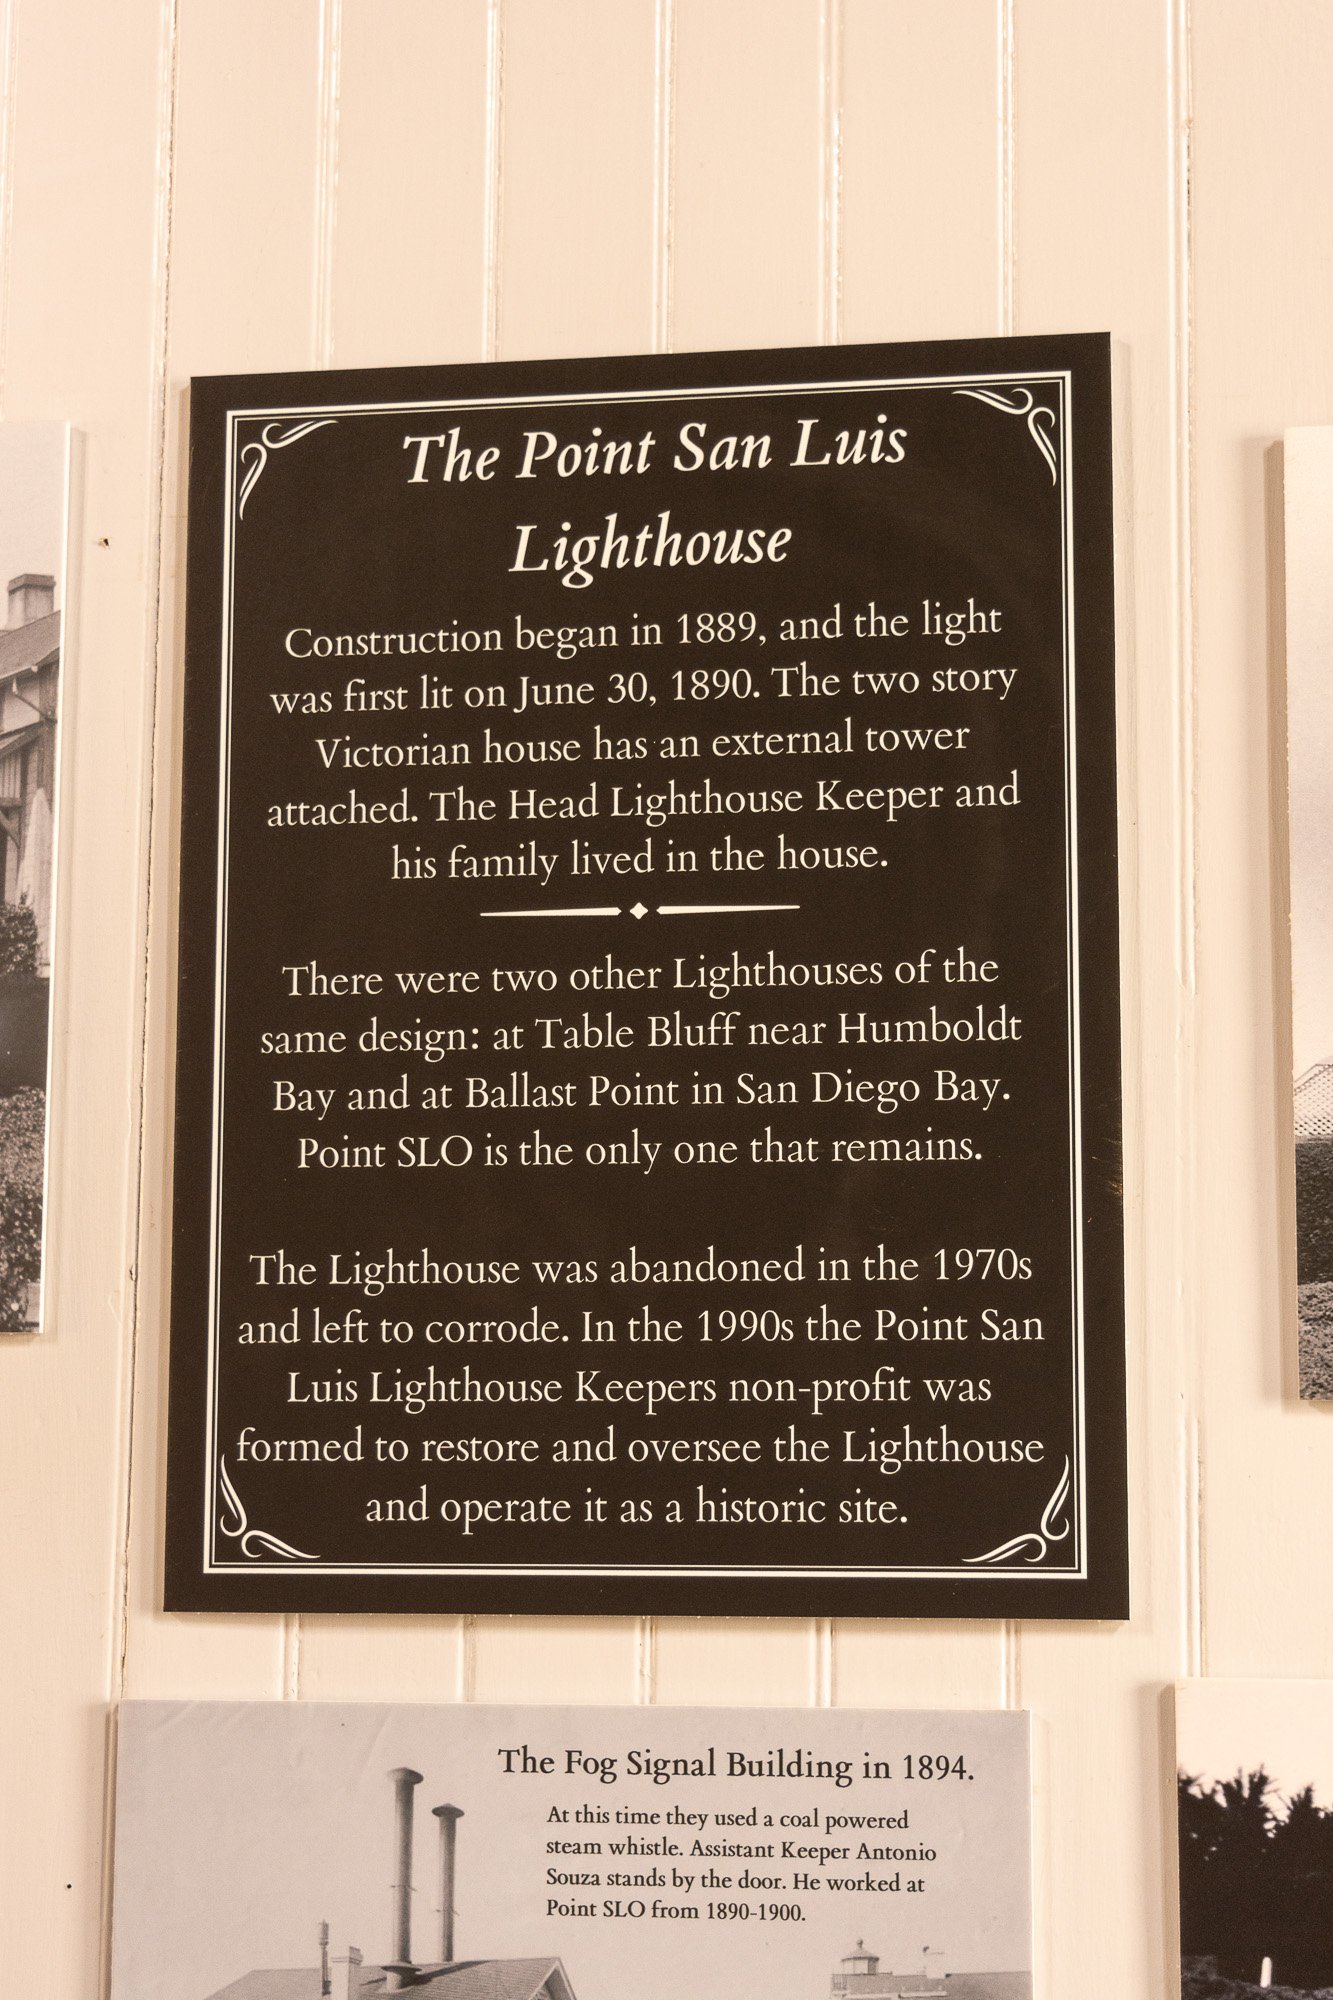 History of the lighthouse